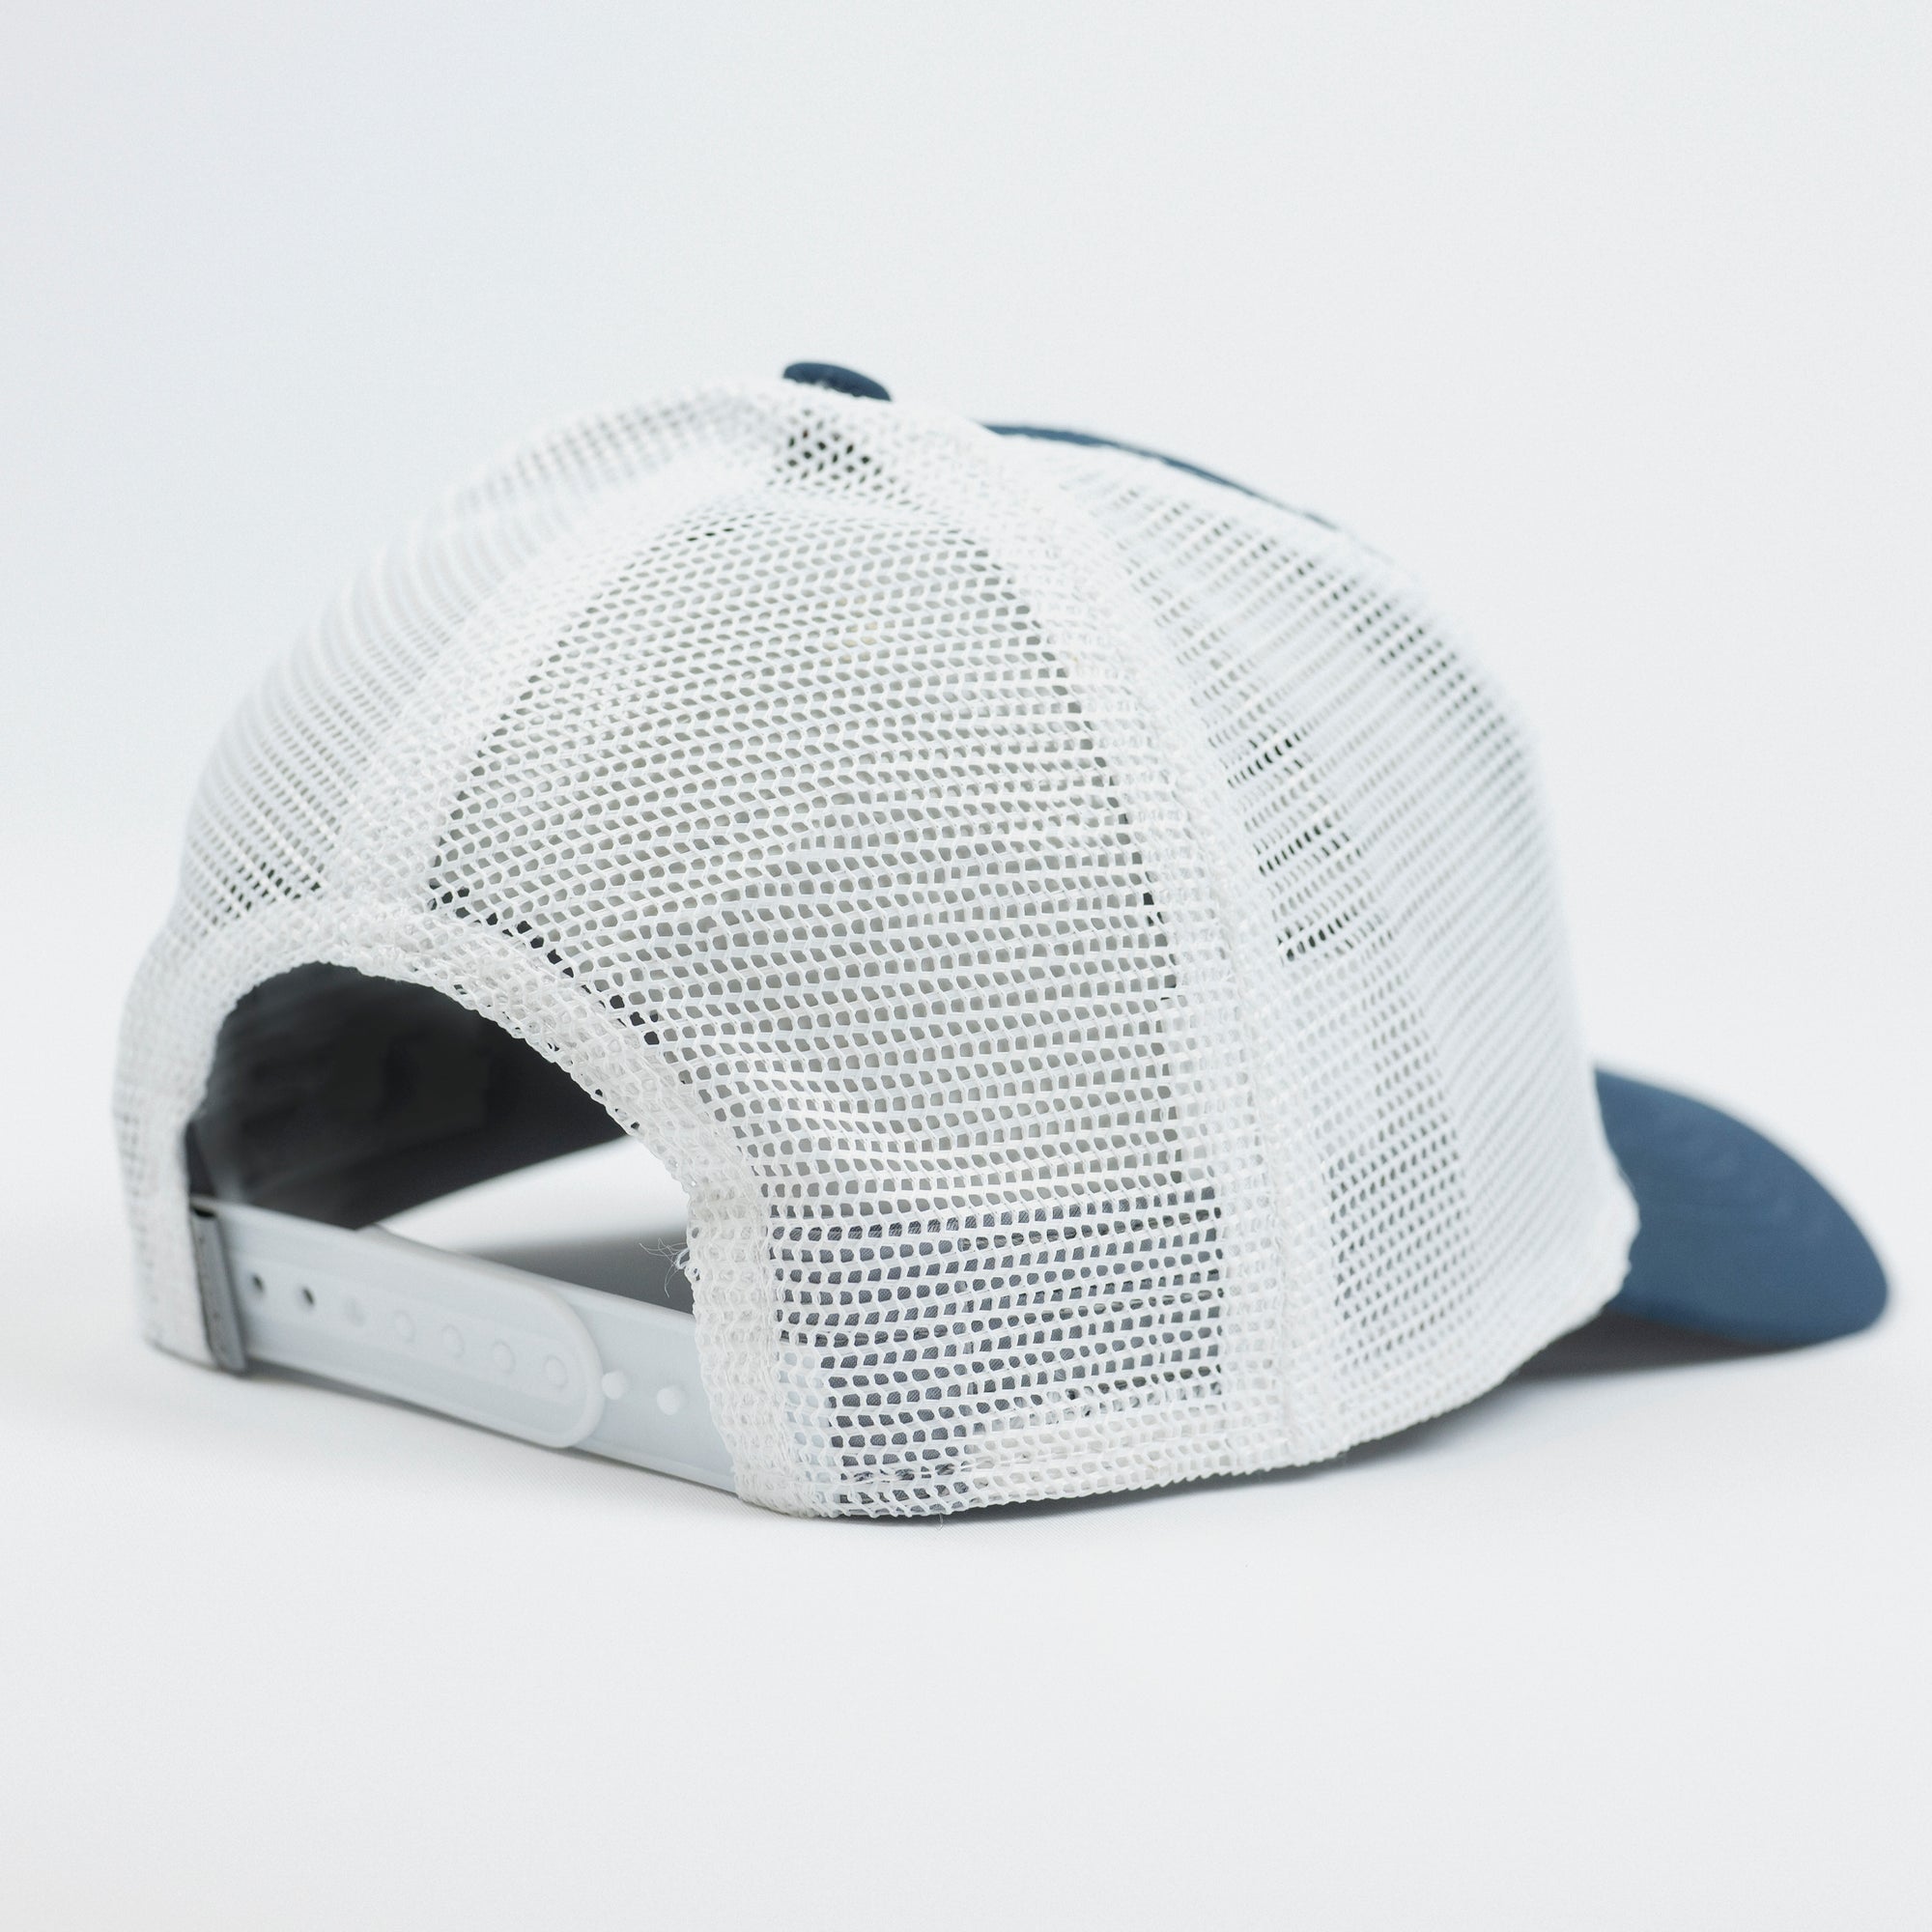 The Fried Egg & Imperial Performance Mesh Hat